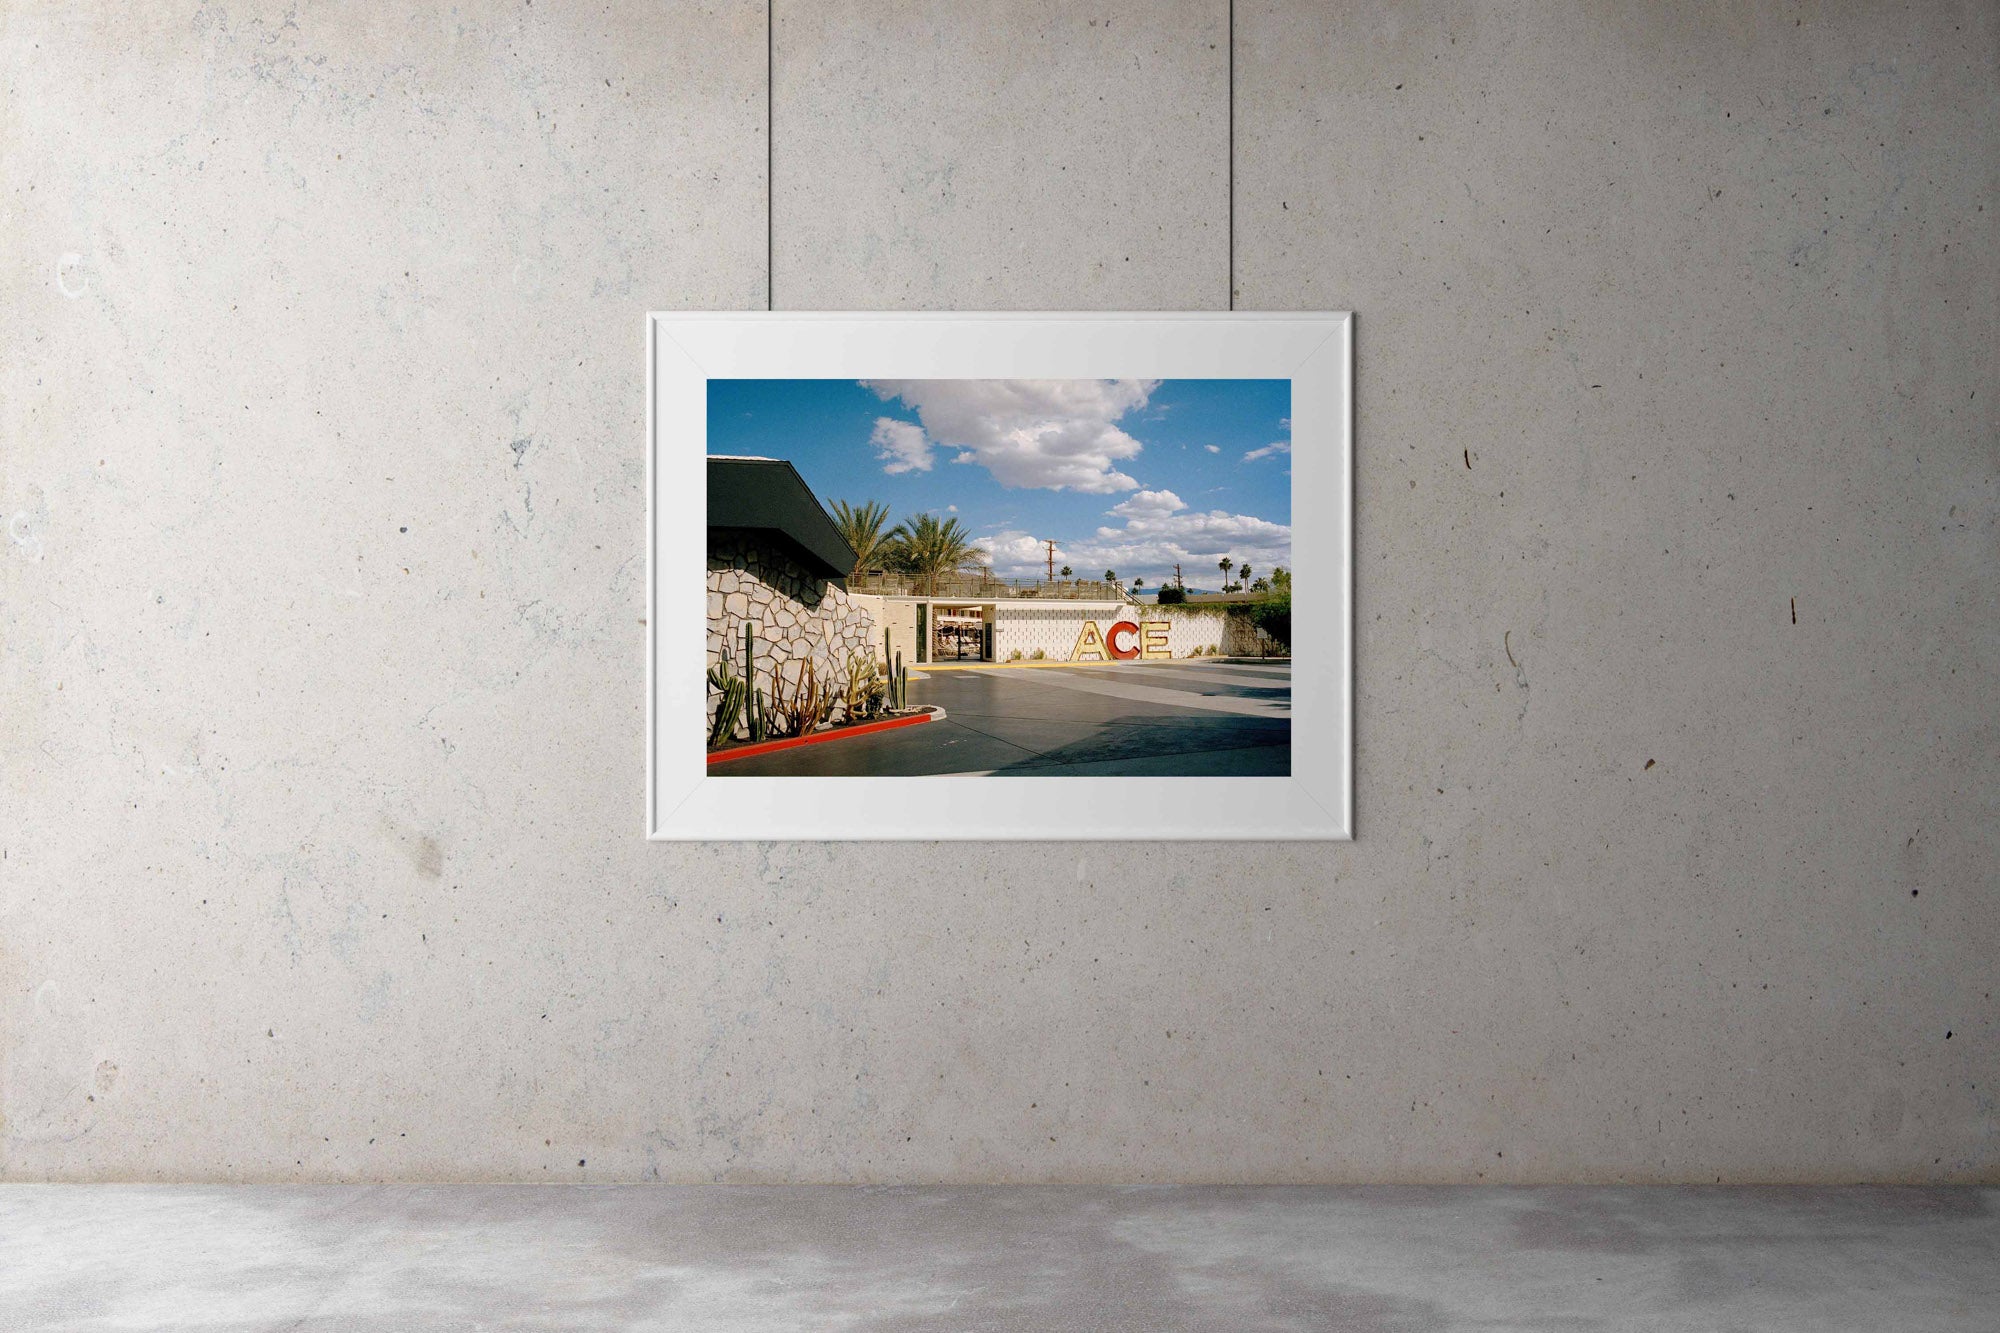 A photograph of the outside of the Ace Hotel in Palm Springs California. There is a large mid century sign that says ACE Blue skies & clouds with palm trees in the background. USA, Artwork, Prints, wall art, California, Photographic prints, Ocean Palm Springs, Framed artwork, Photography,  Film photography, Vintage photo style,  Interior design, beach, buy Art, photography art, buy art, ace hotel, Prints for sale, art prints, colour photography, sun, beach, sun baking, retro, interior design artwork,